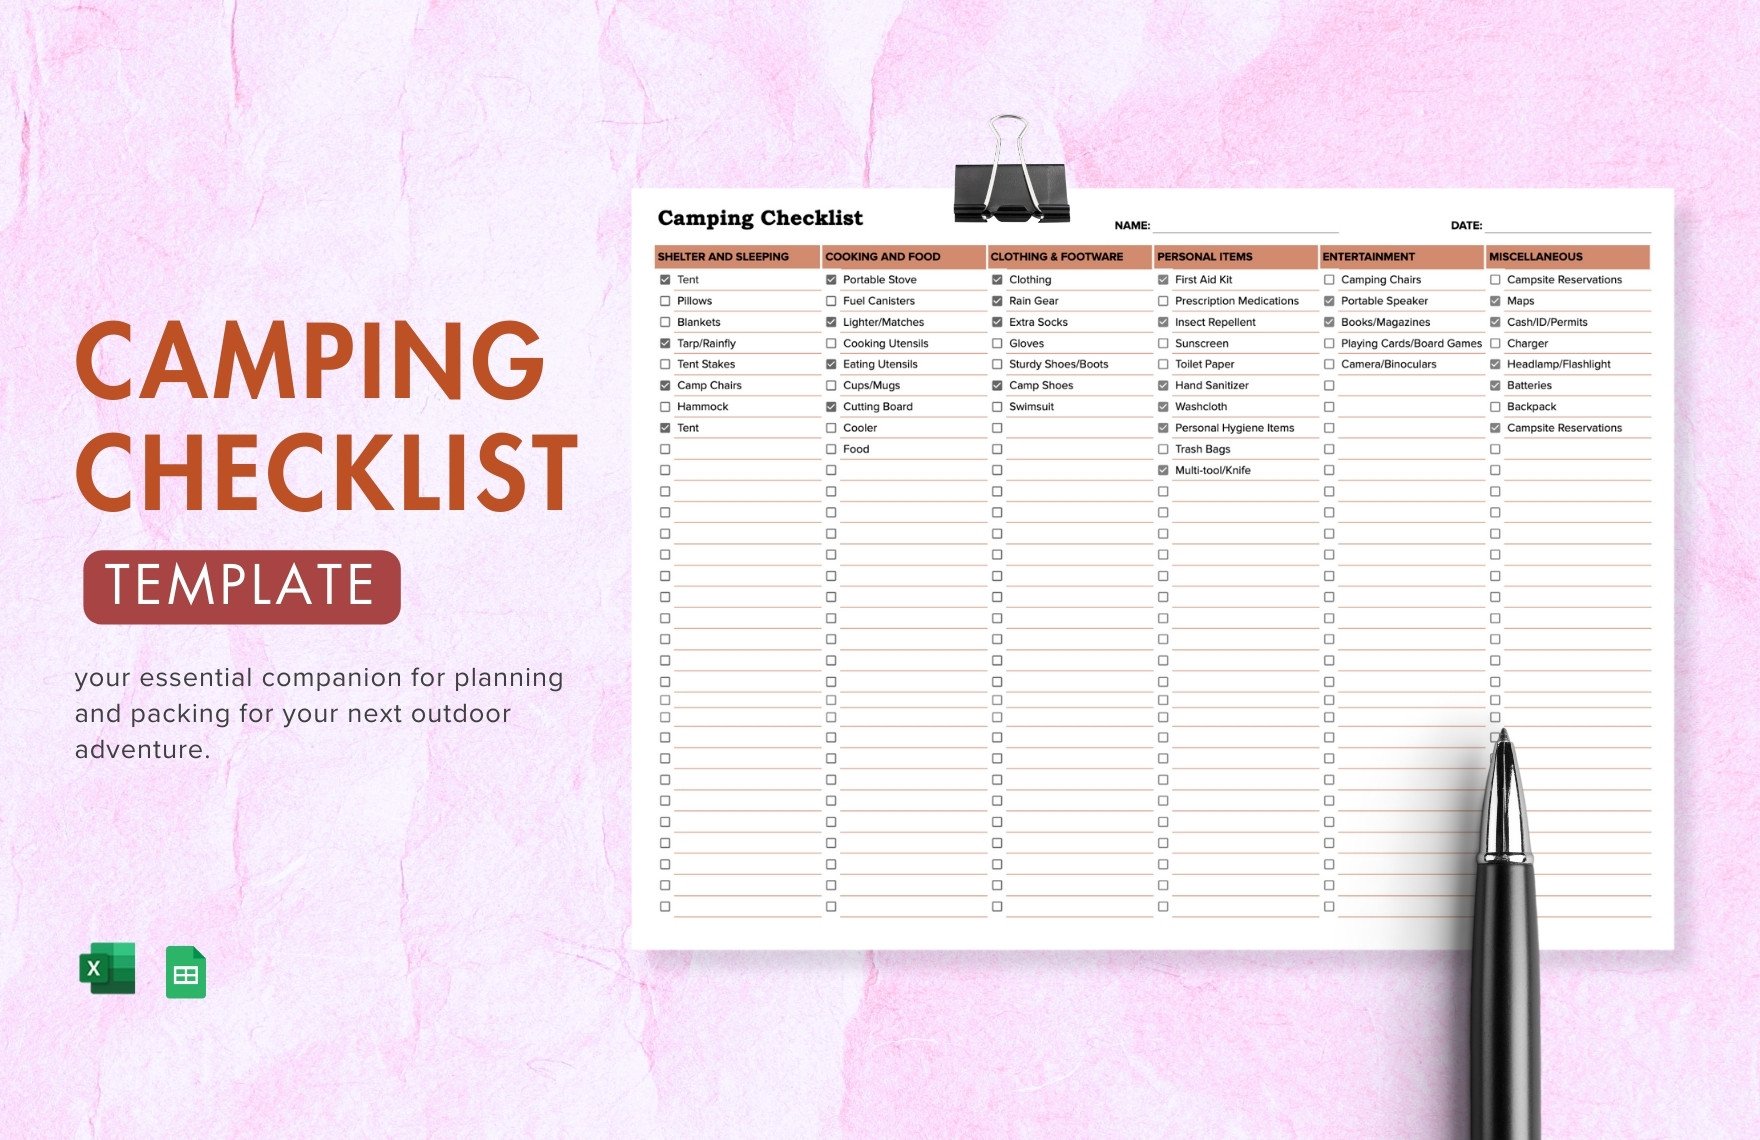 Camping Checklist Template in Excel, Google Sheets